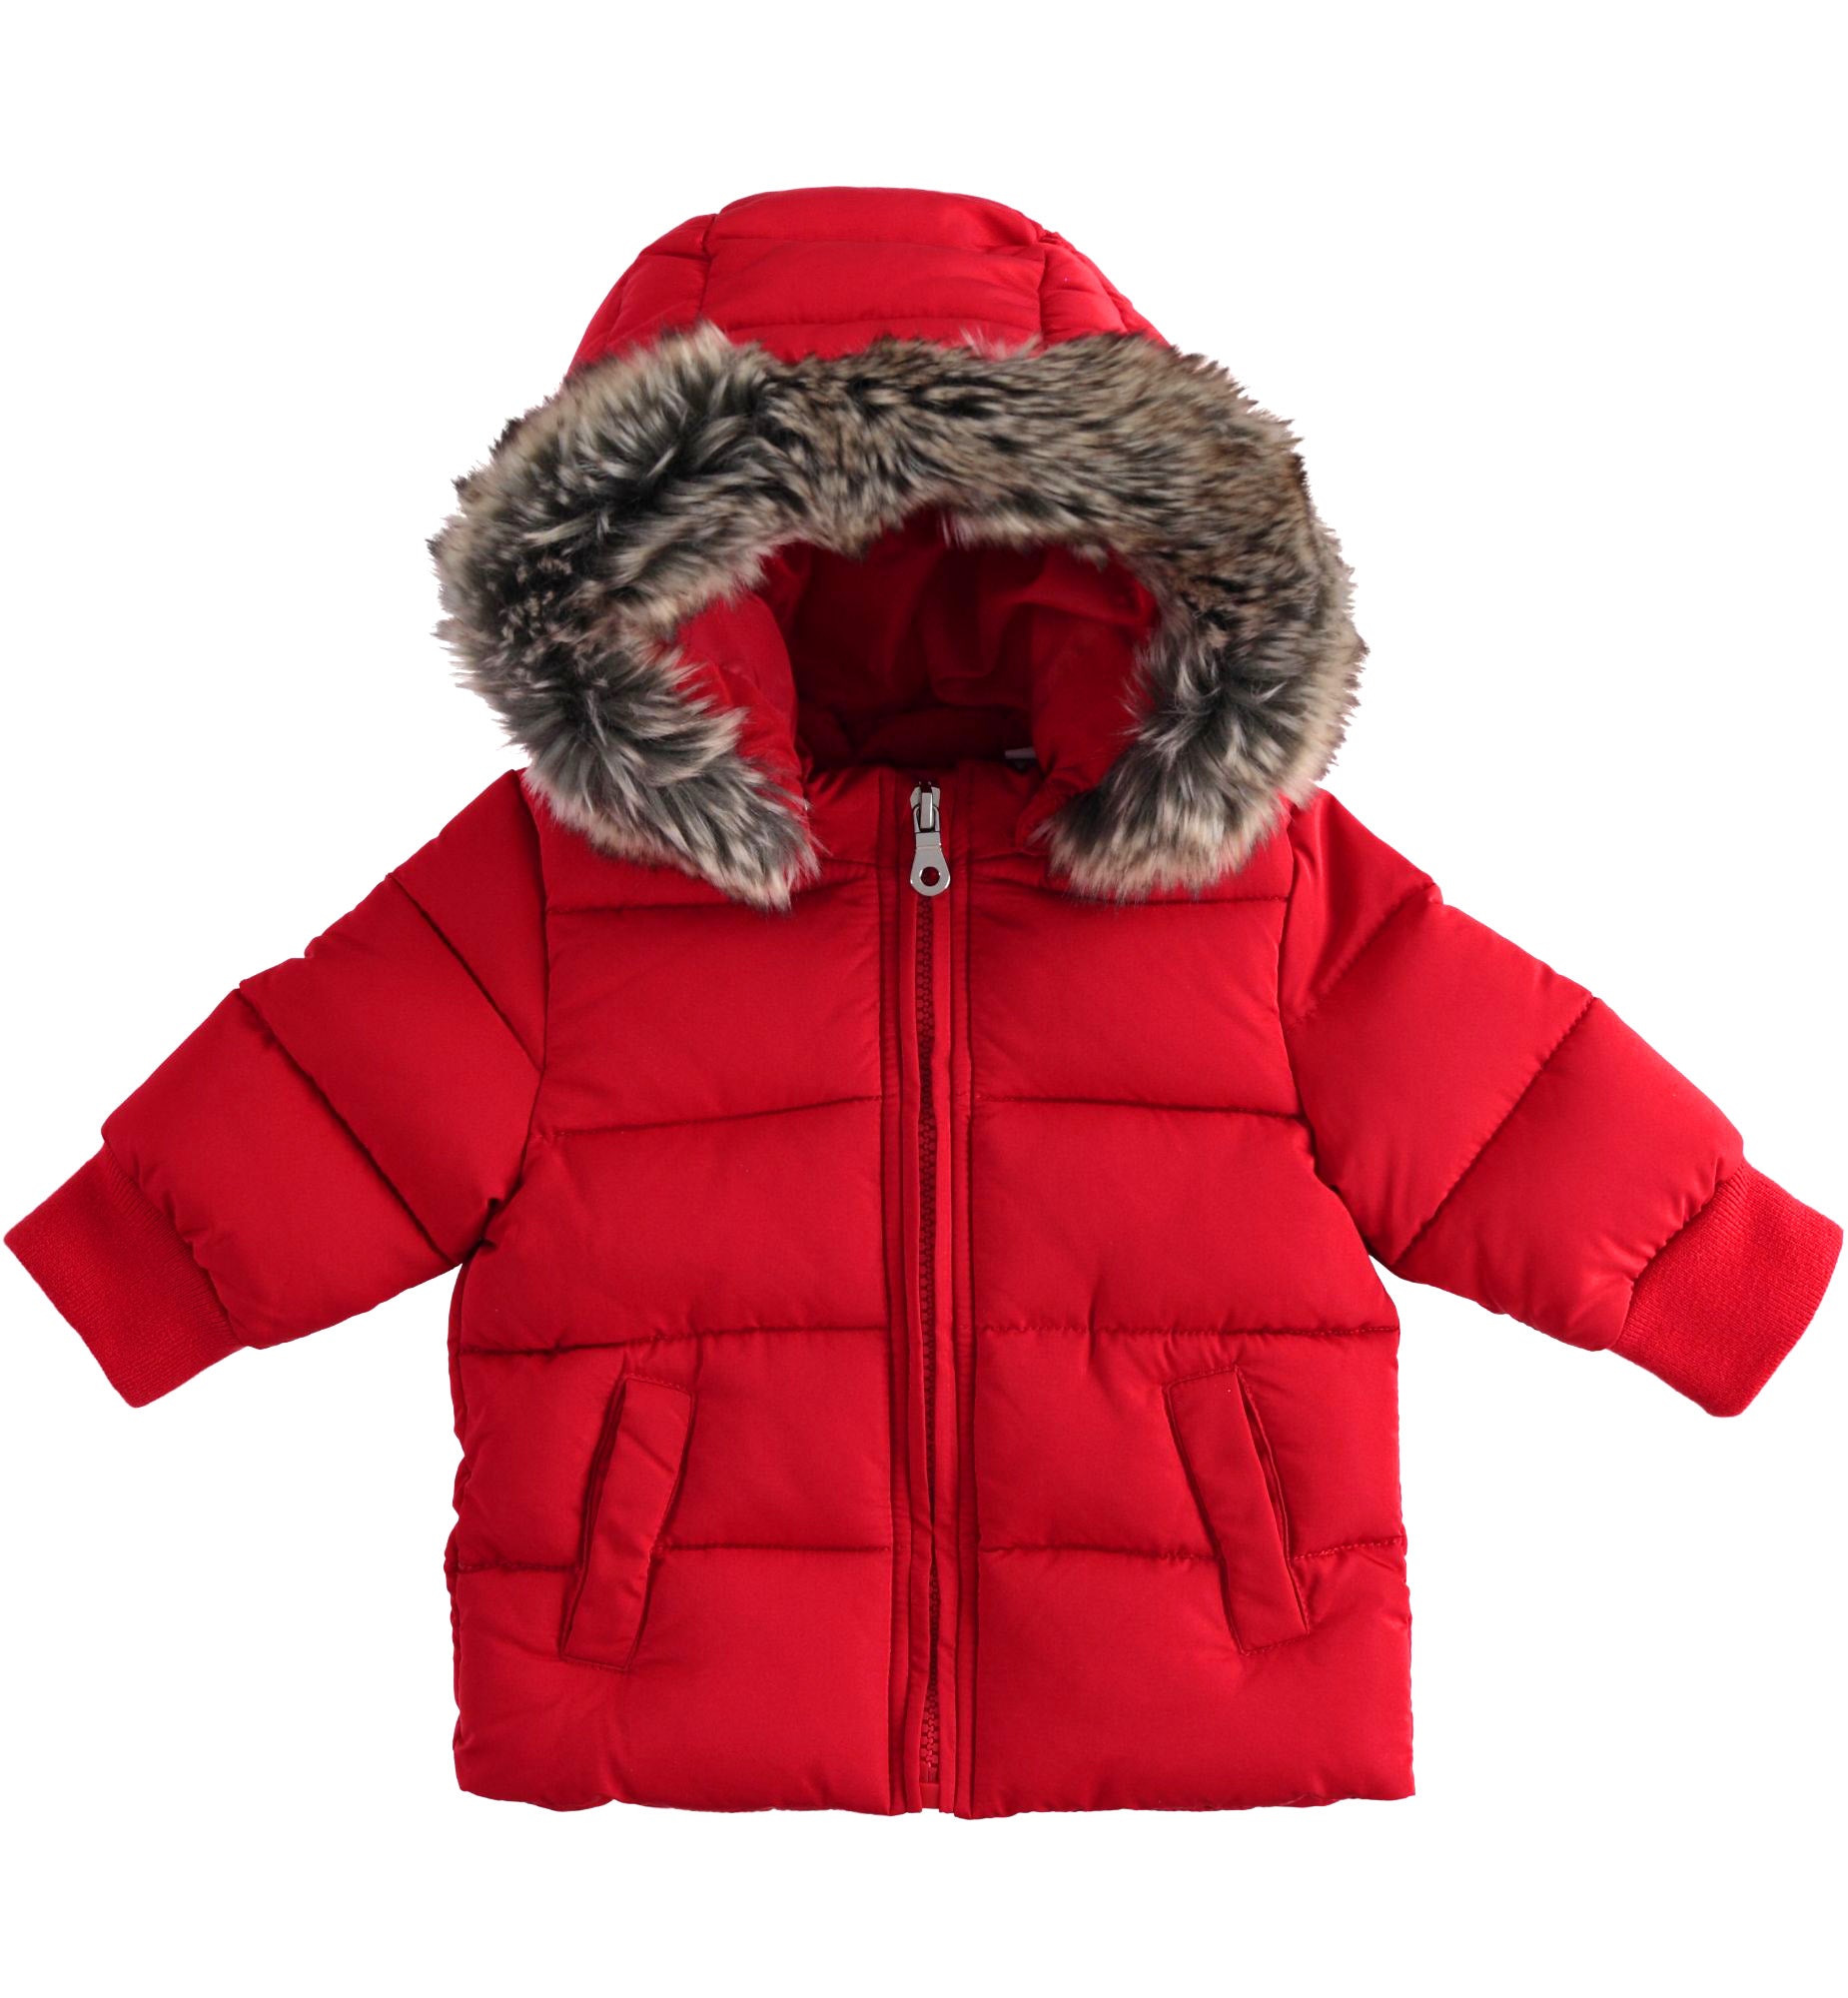 Red Winter Down Jacket with Hood - LAST ONE IN 18 MONTHS